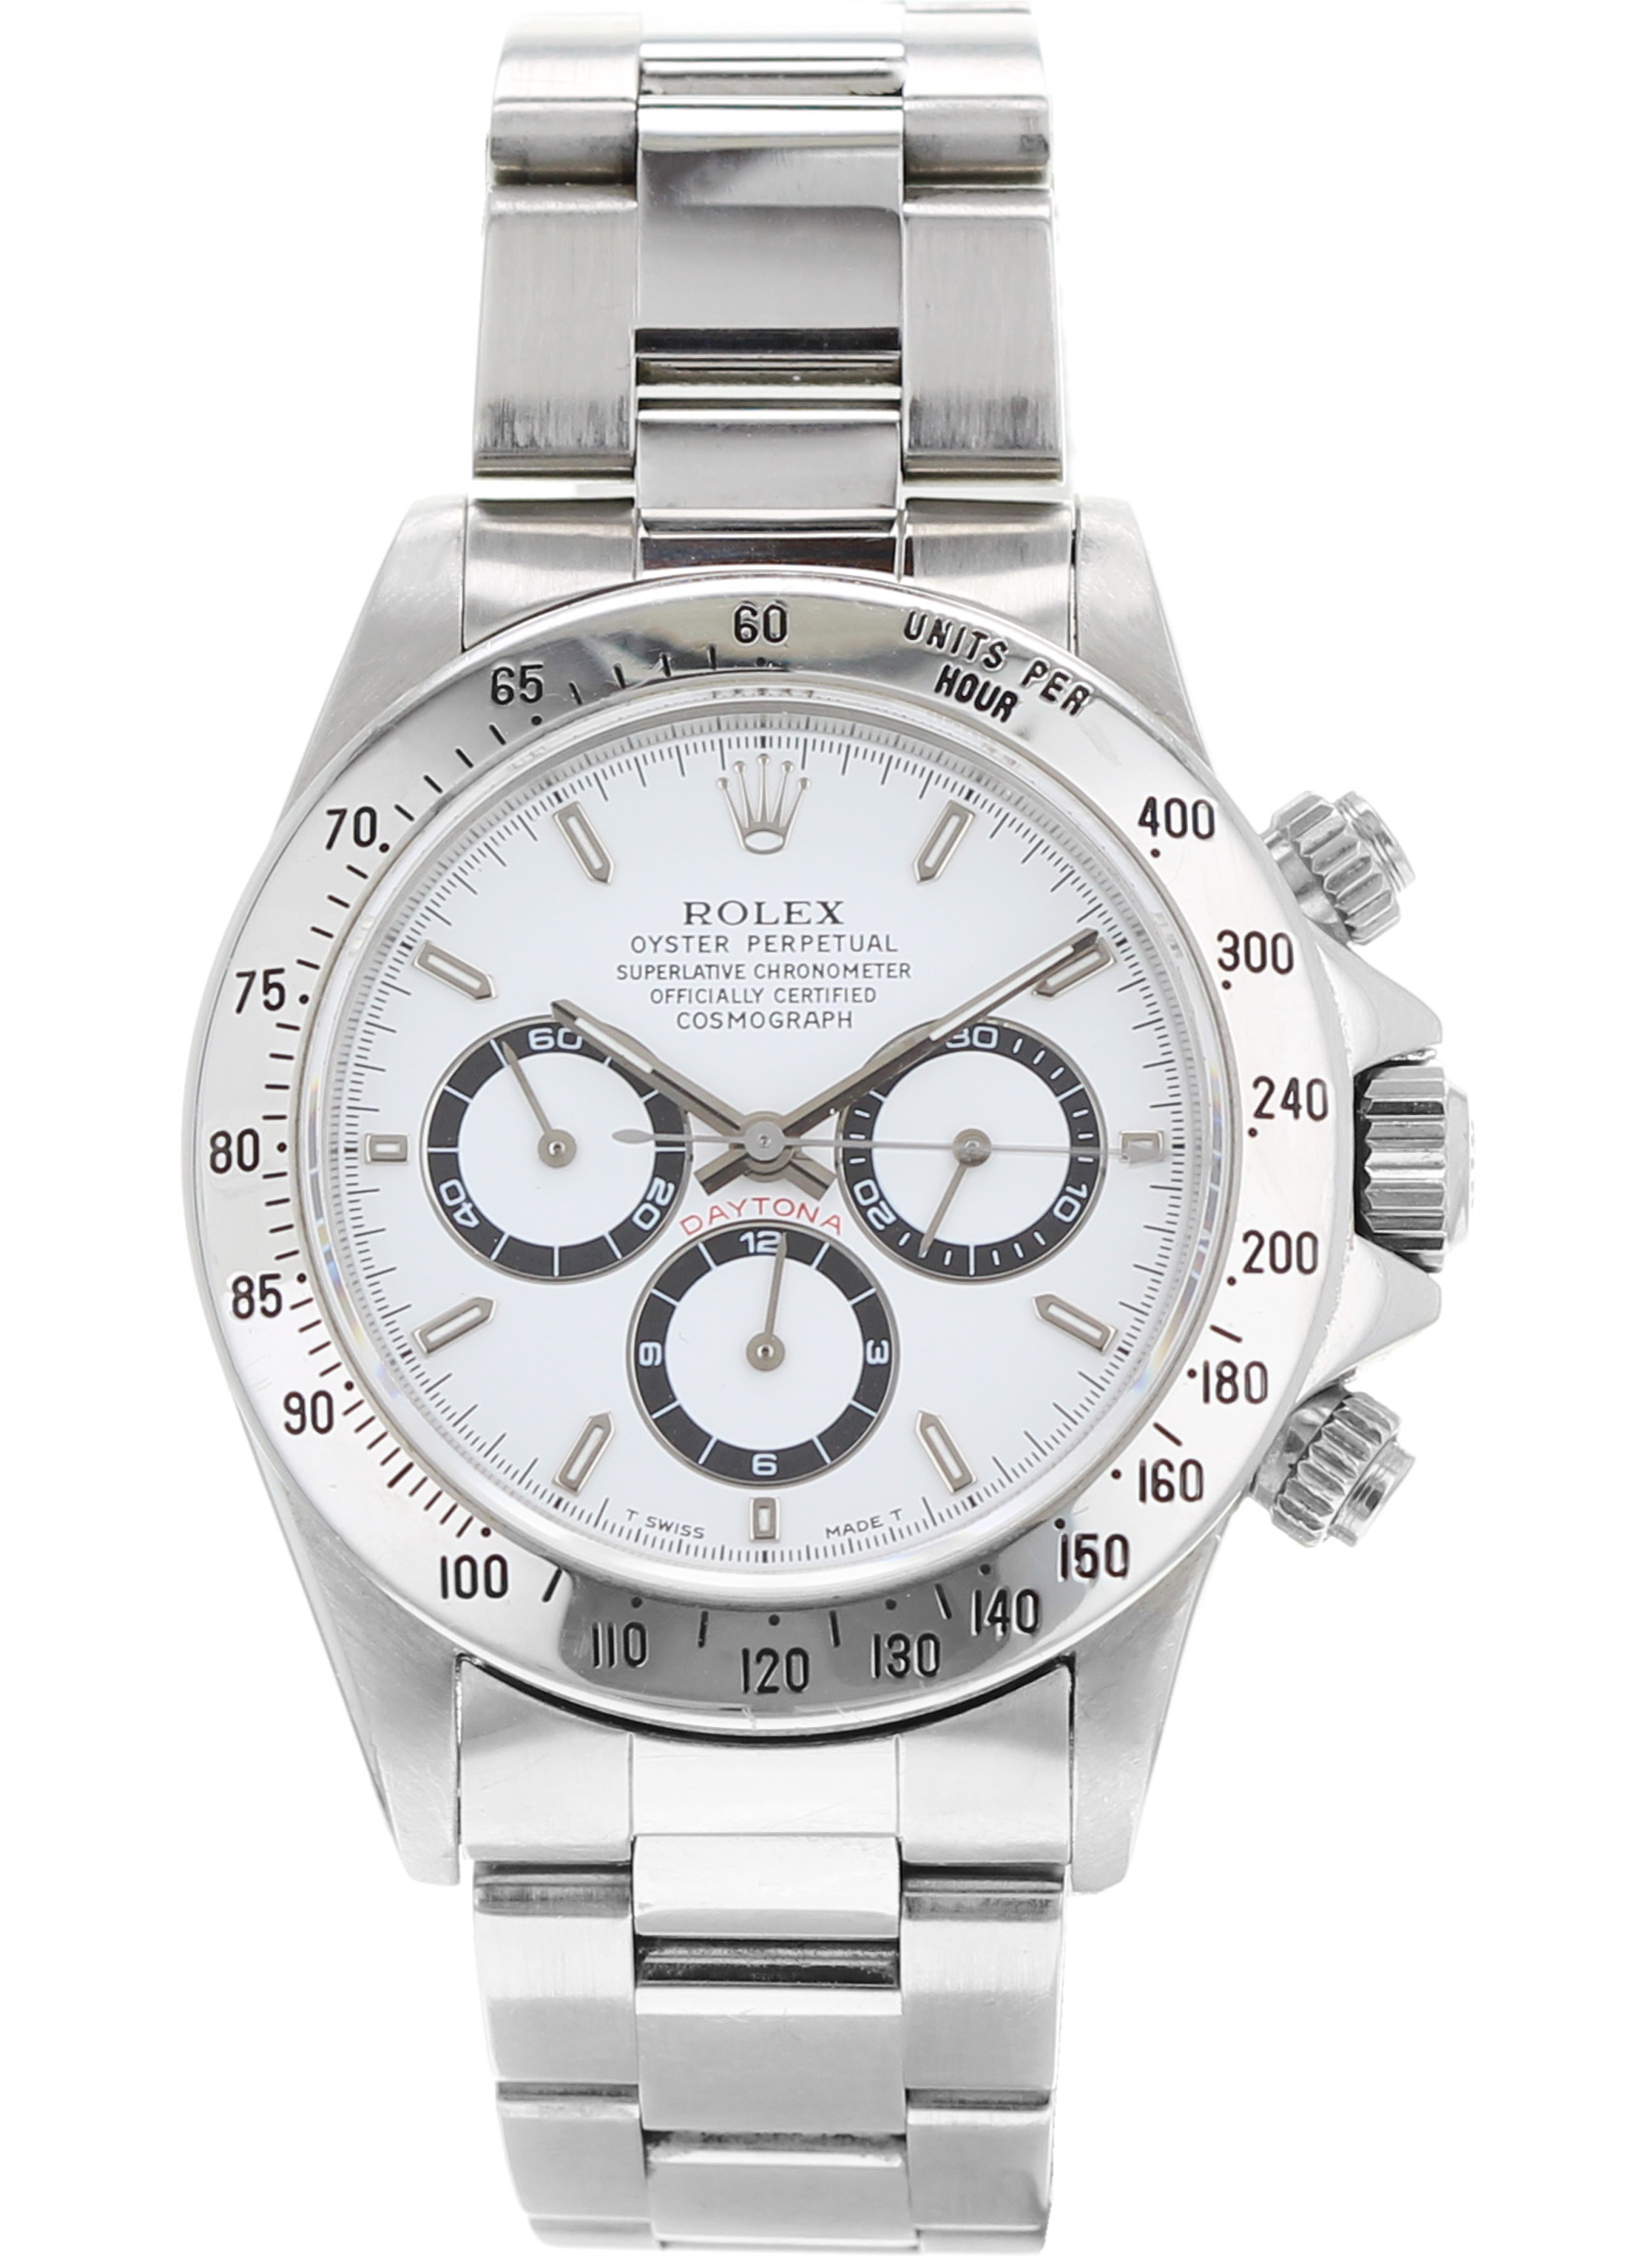 rolex oyster perpetual superlative chronometer officially certified cosmograph prix